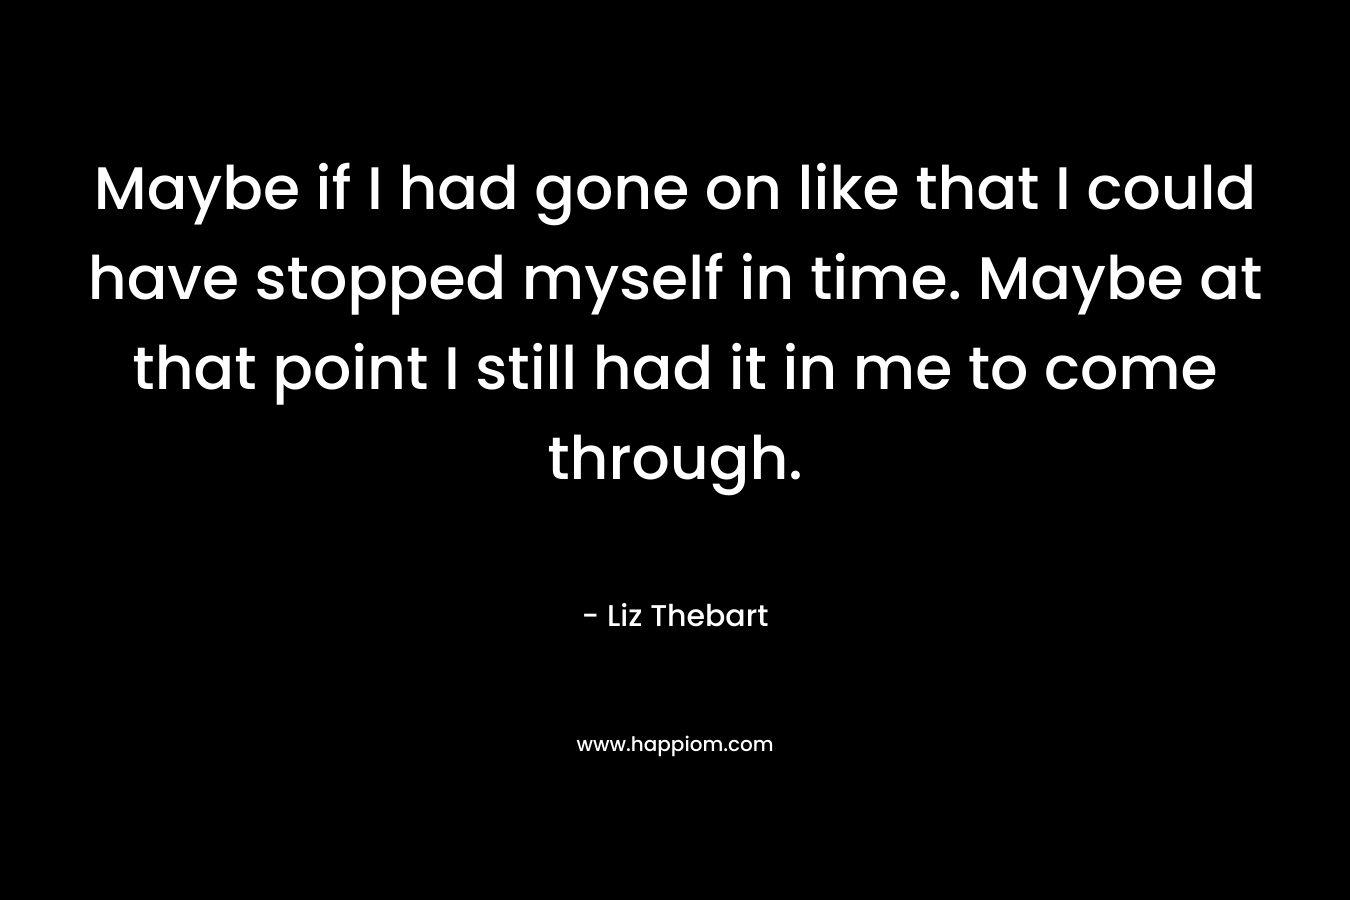 Maybe if I had gone on like that I could have stopped myself in time. Maybe at that point I still had it in me to come through. – Liz Thebart